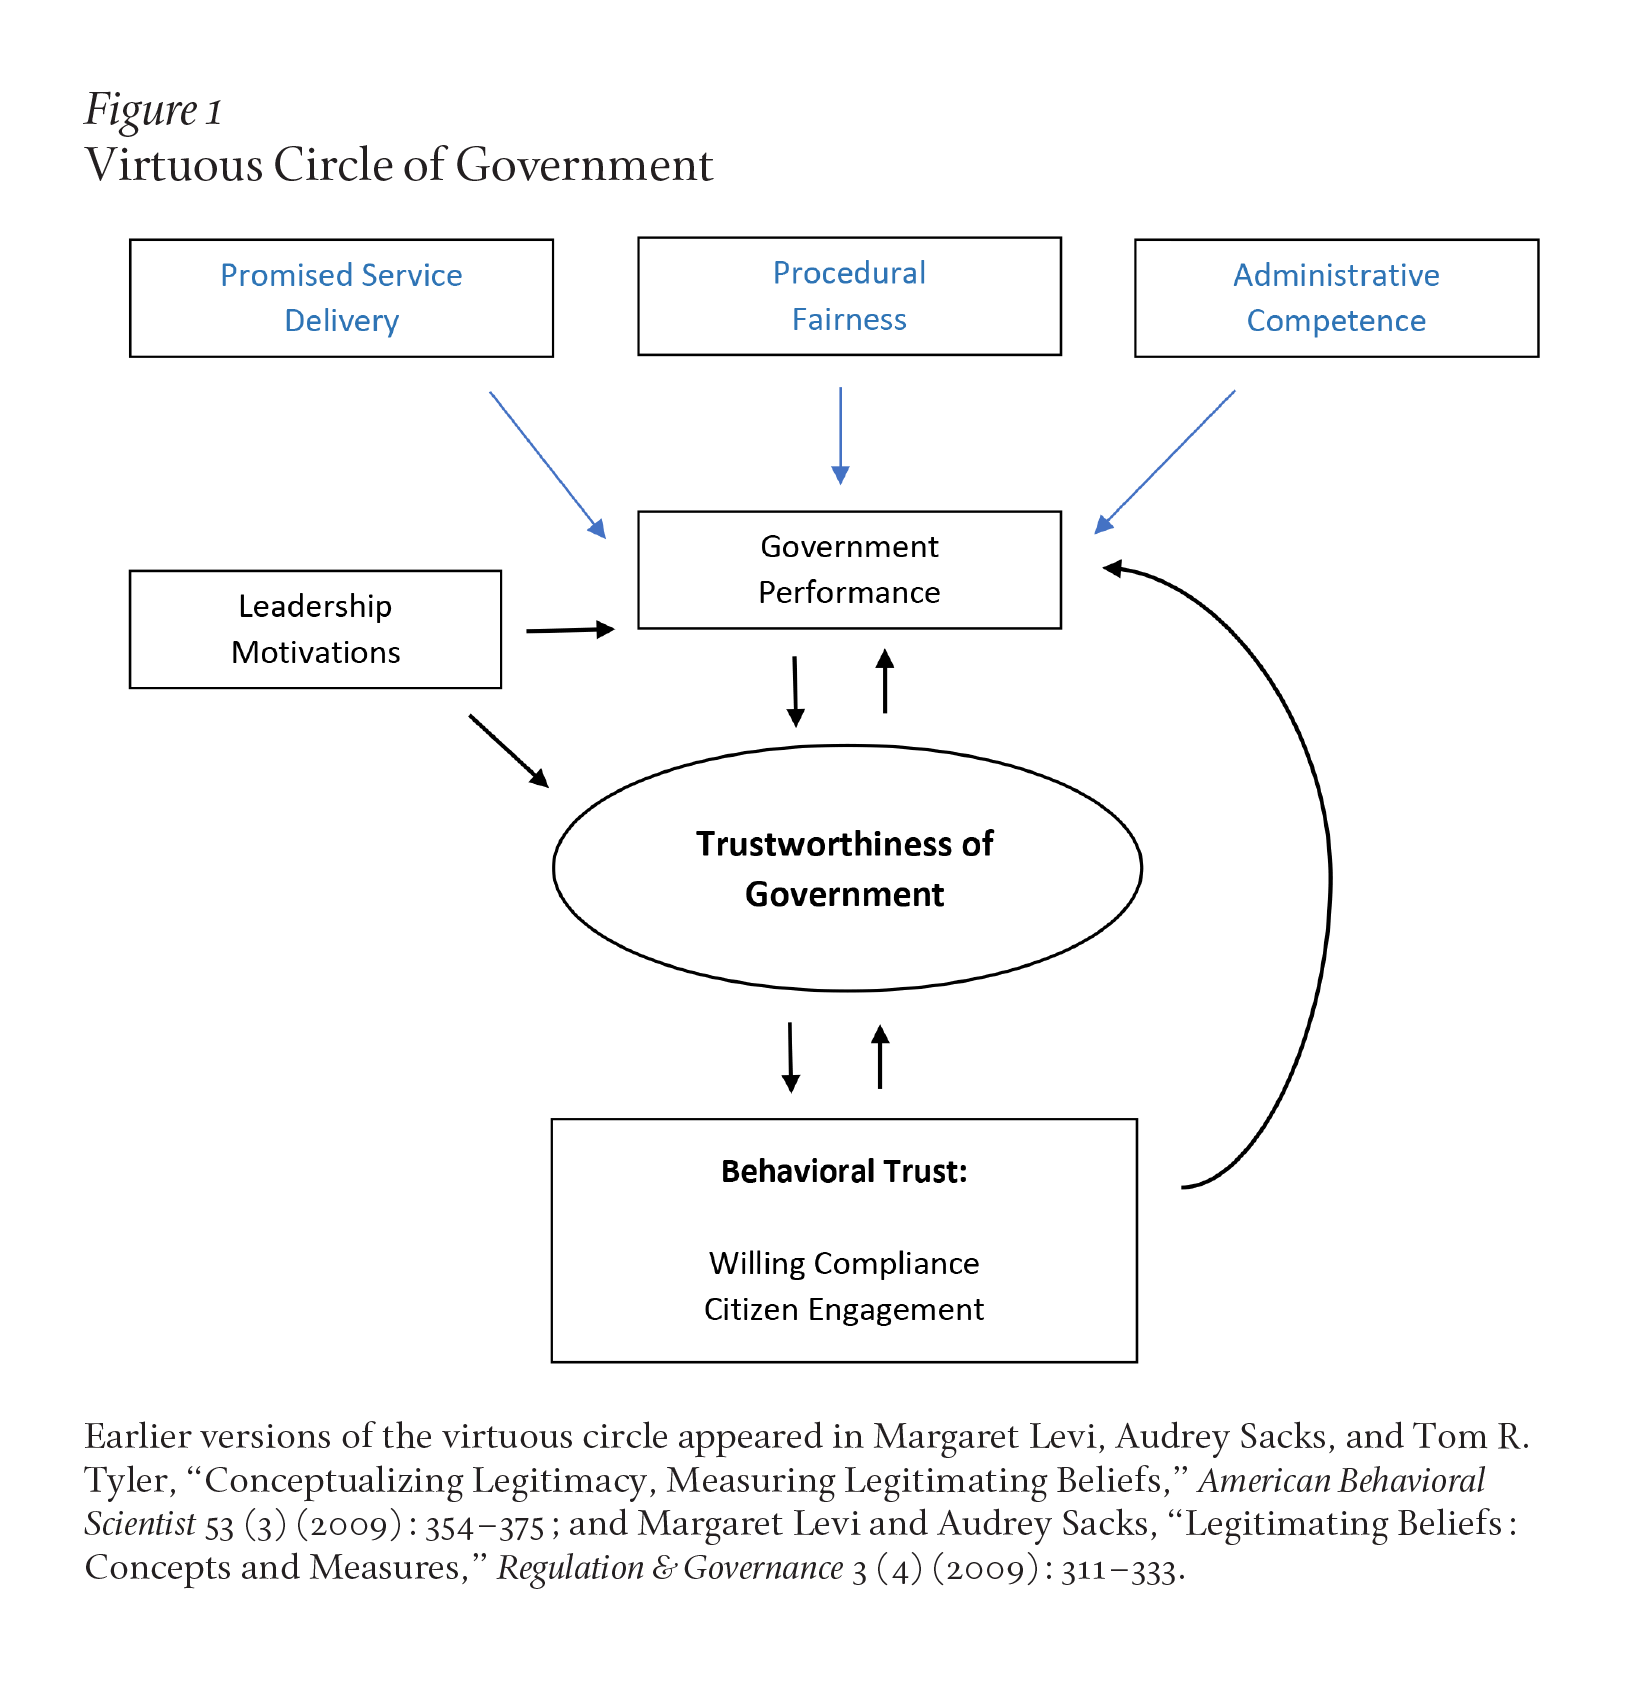 Figure 1 is a cyclical flow chart. At the top, promised service delivery, procedural fairness, and administrative competence feed into government performance. Performance feeds and receives from trustworthiness of government, which then flows into behavioral trust. Behavioral trust then completes the circle, pointing back to government performance. Leadership motivations also point toward government performance and trustworthiness.